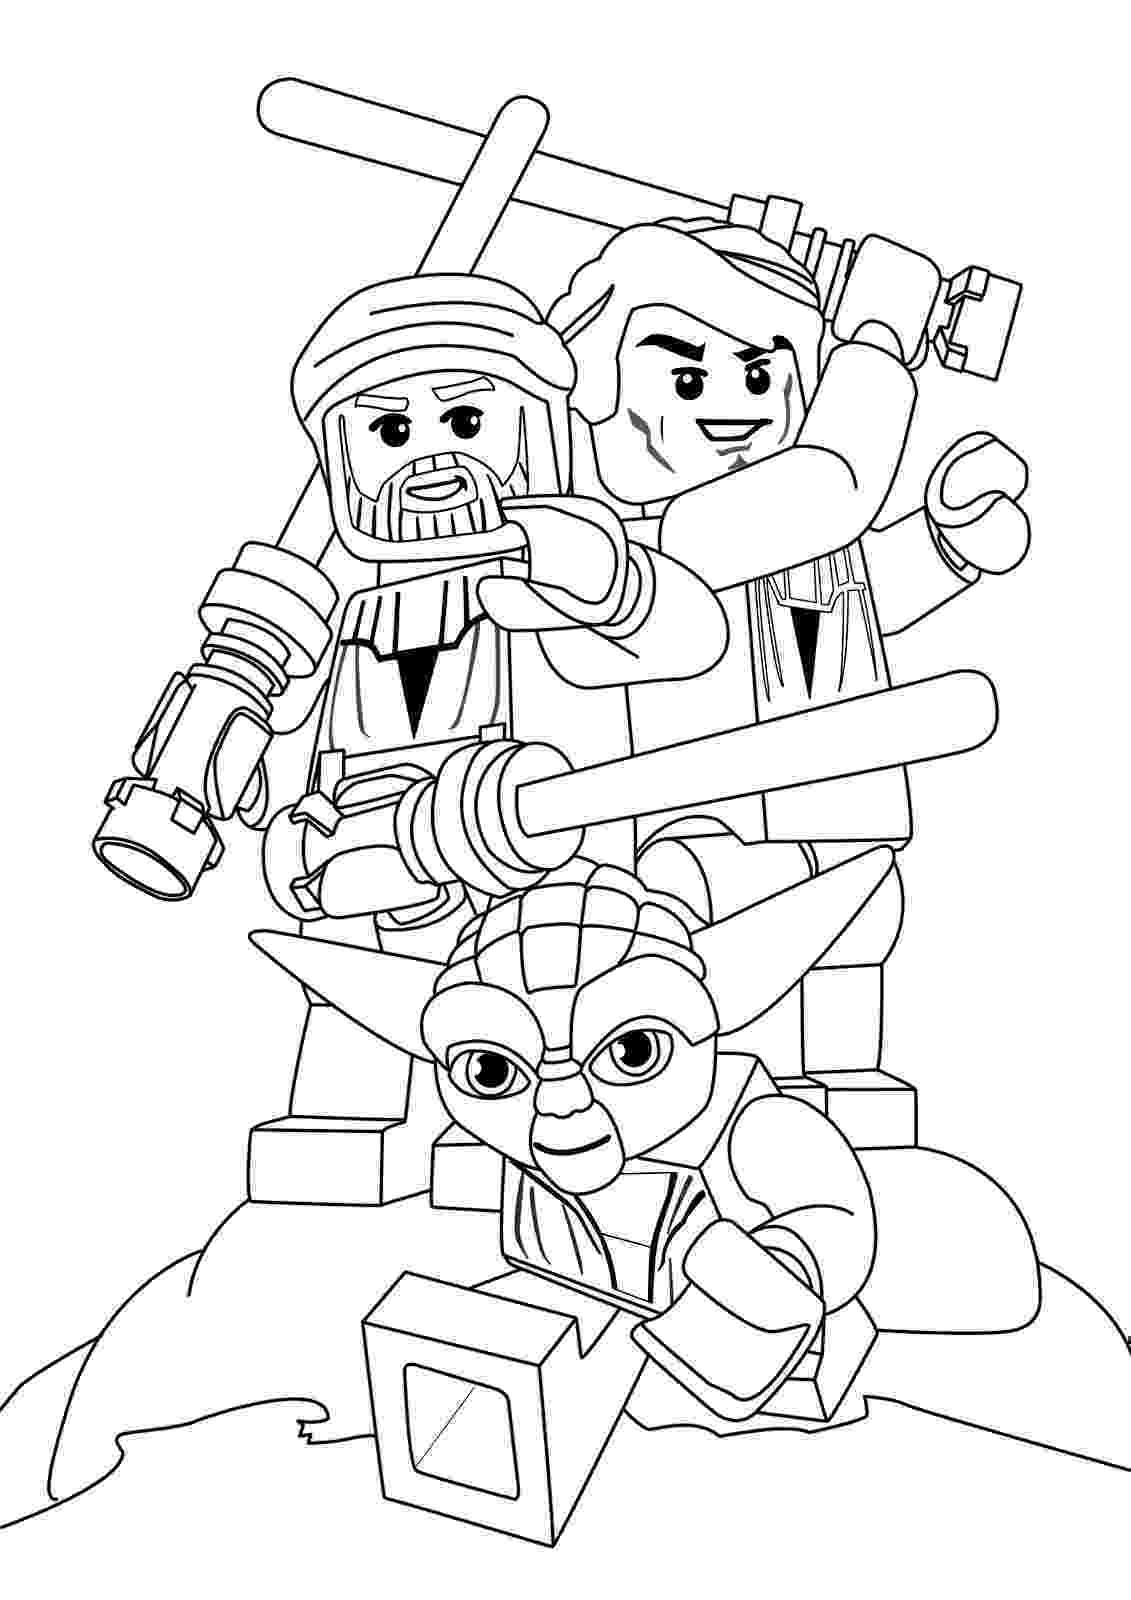 lego christmas coloring pages 25 wonderful lego movie coloring pages for toddlers coloring christmas pages lego 